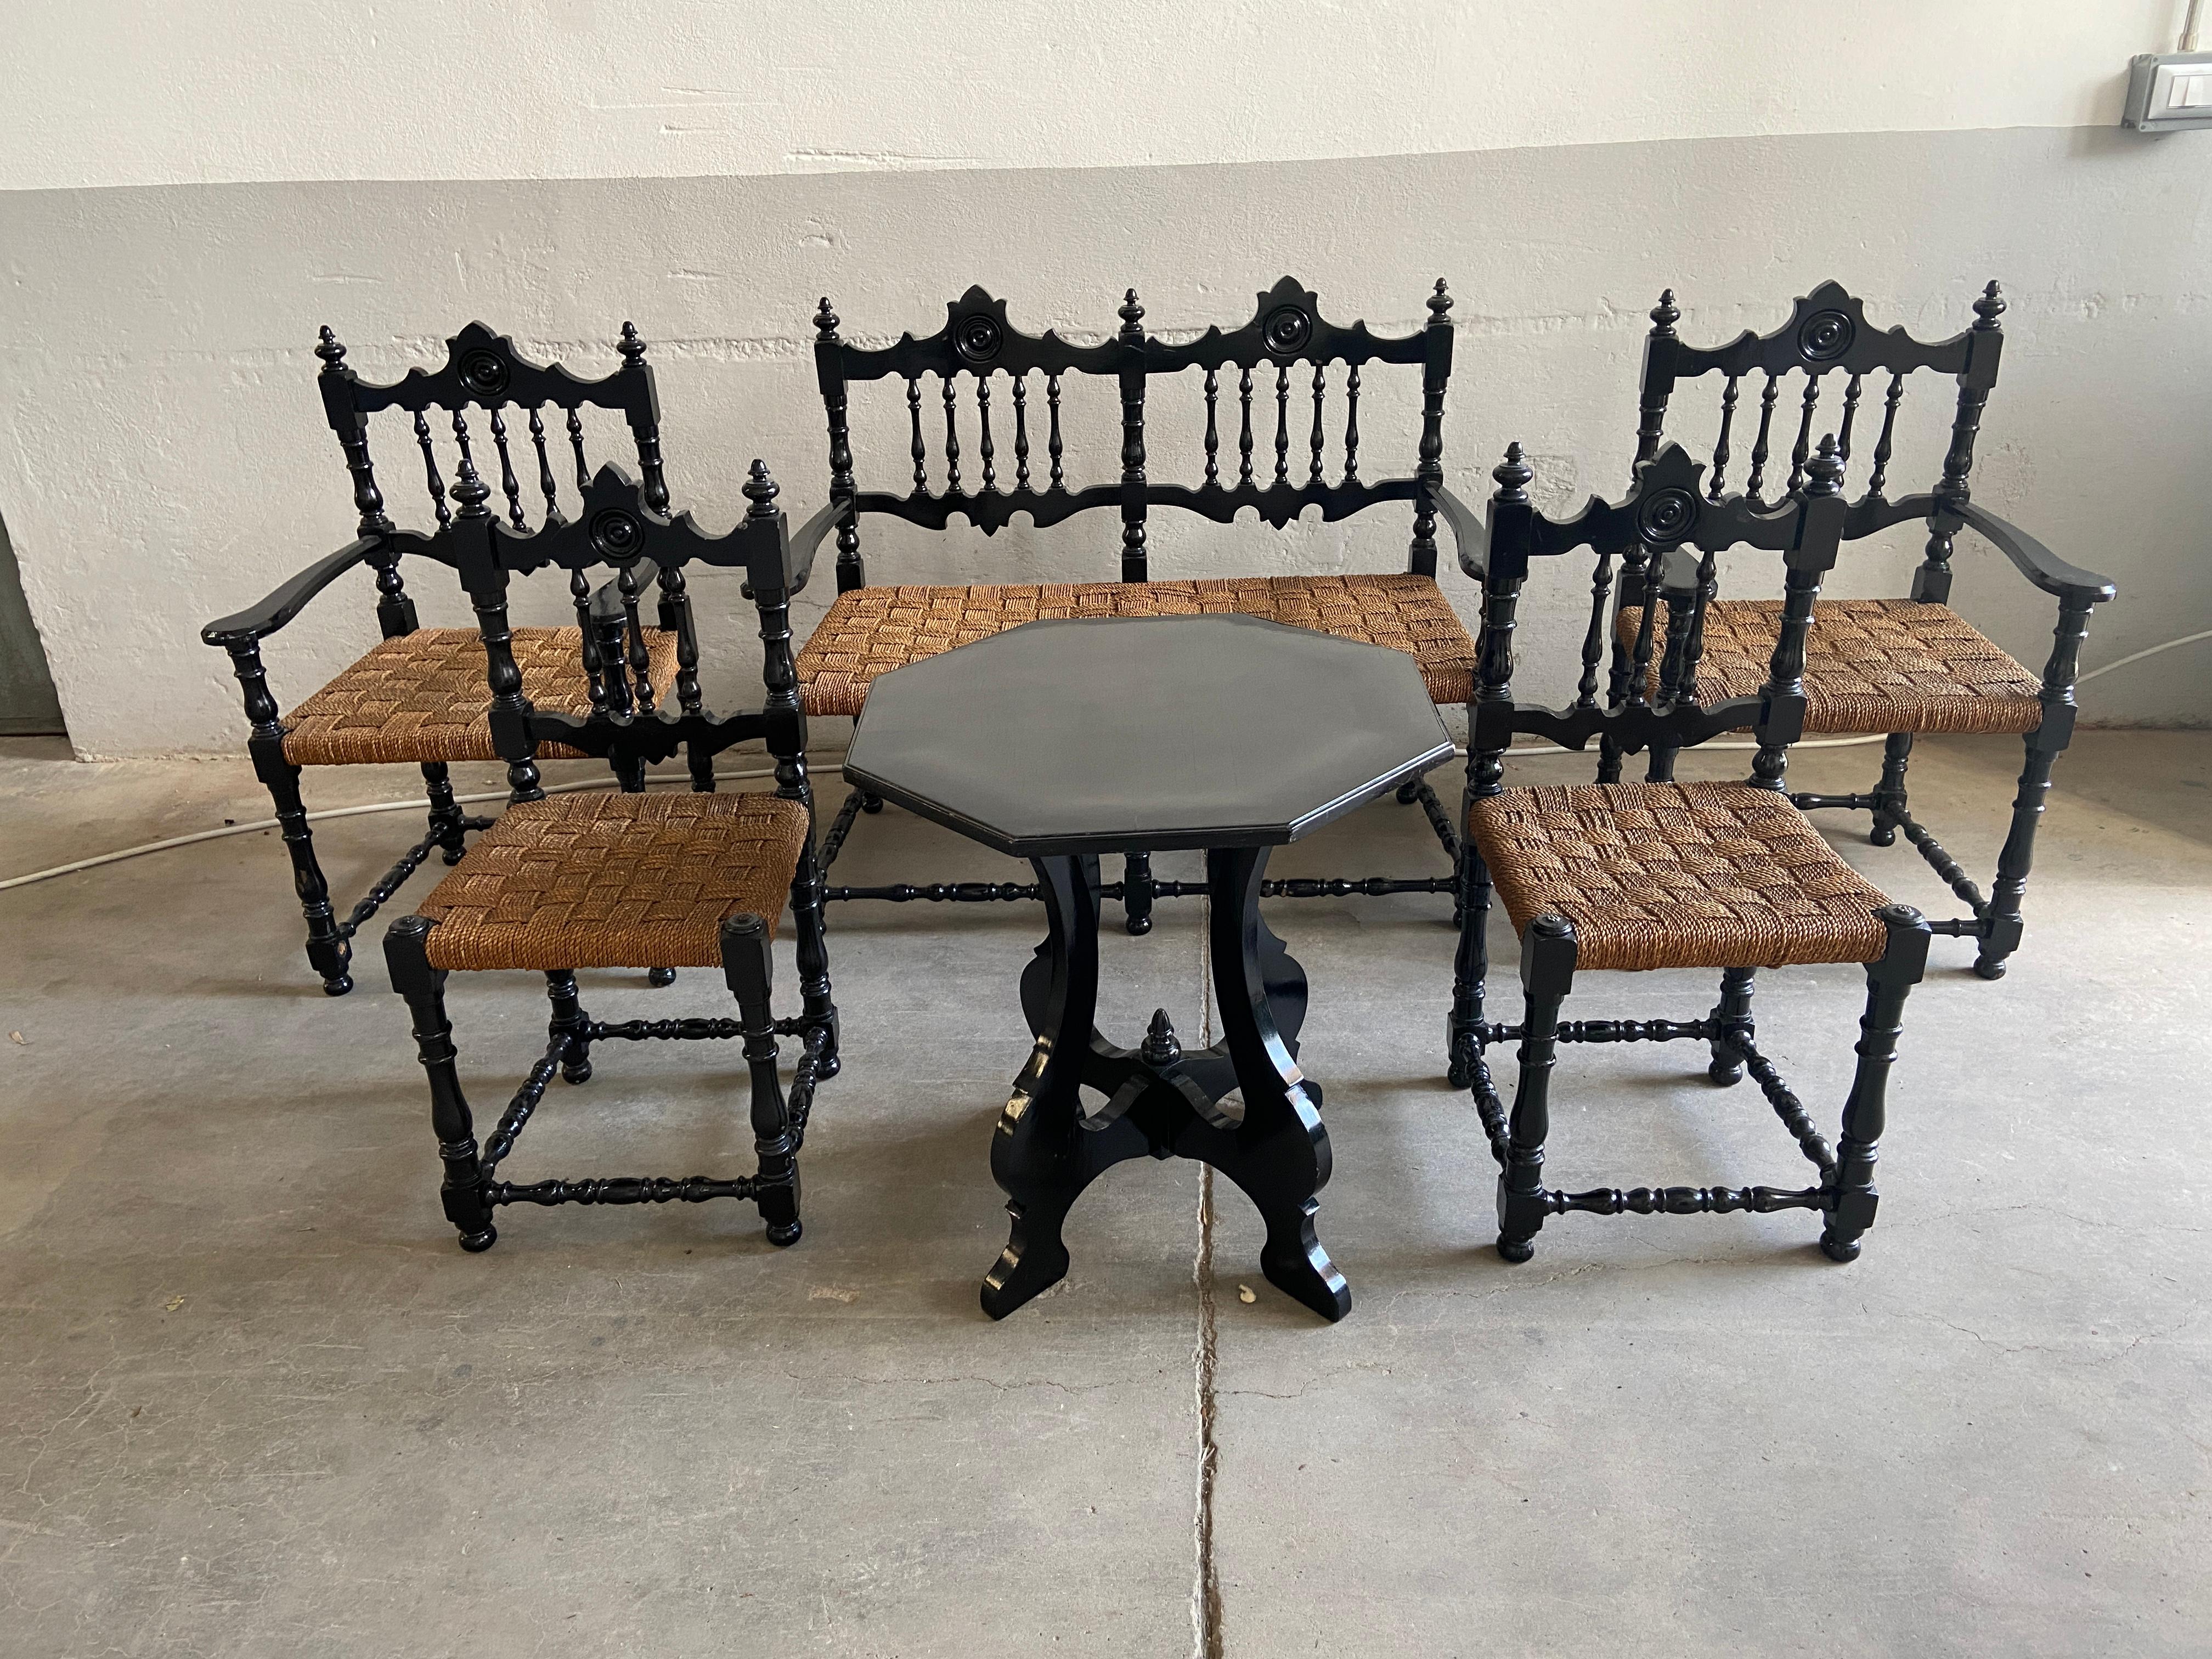 Mid-Century Modern Portuguese living room set in ebonized wood and straw stuffing from 1960s. 
The set consists of a little table, two armchairs, two chairs and one sofa.
Measurements:
- Table cm.80 x 80 x H 74 
- Sofa cm.112 x 54 x H 91 (seat